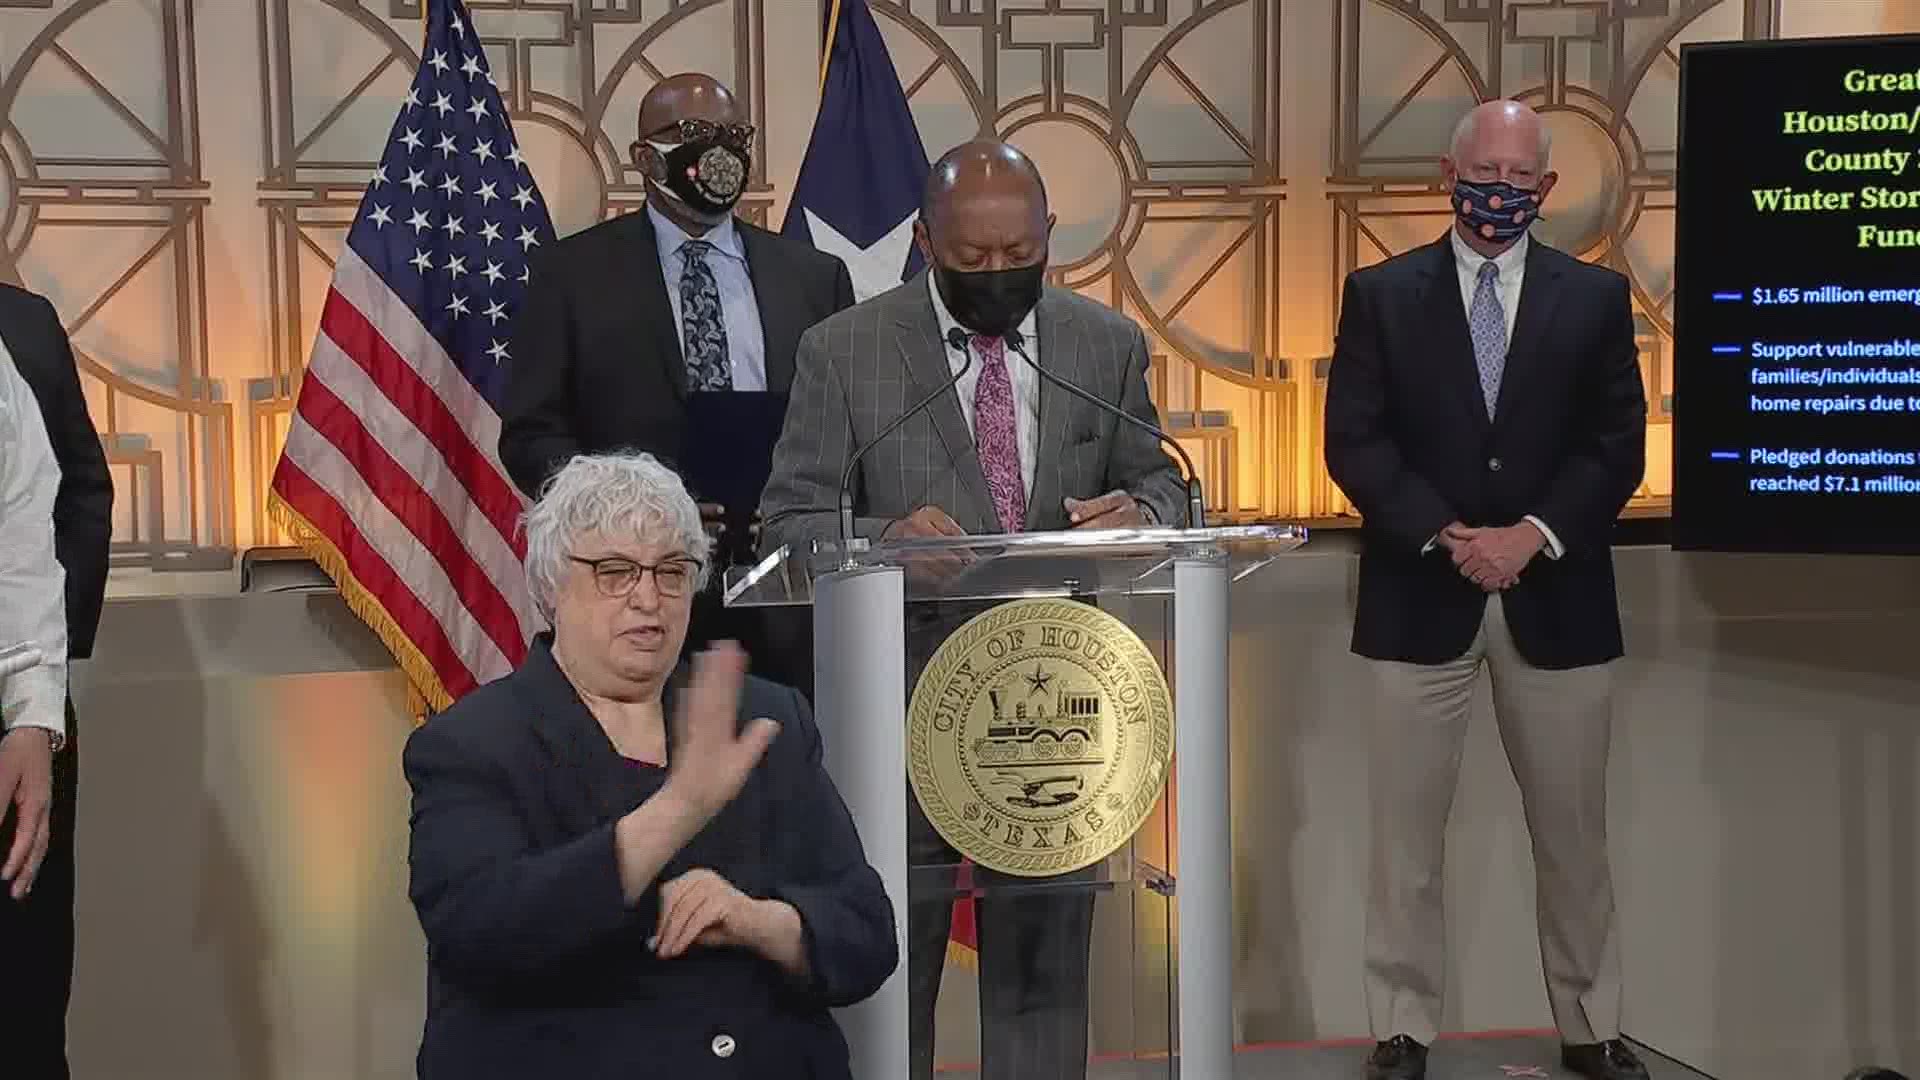 Houston Mayor Sylvester Turner announced Monday that $1.65 million in emergency grants has been approved for residents who need help repairing their homes.